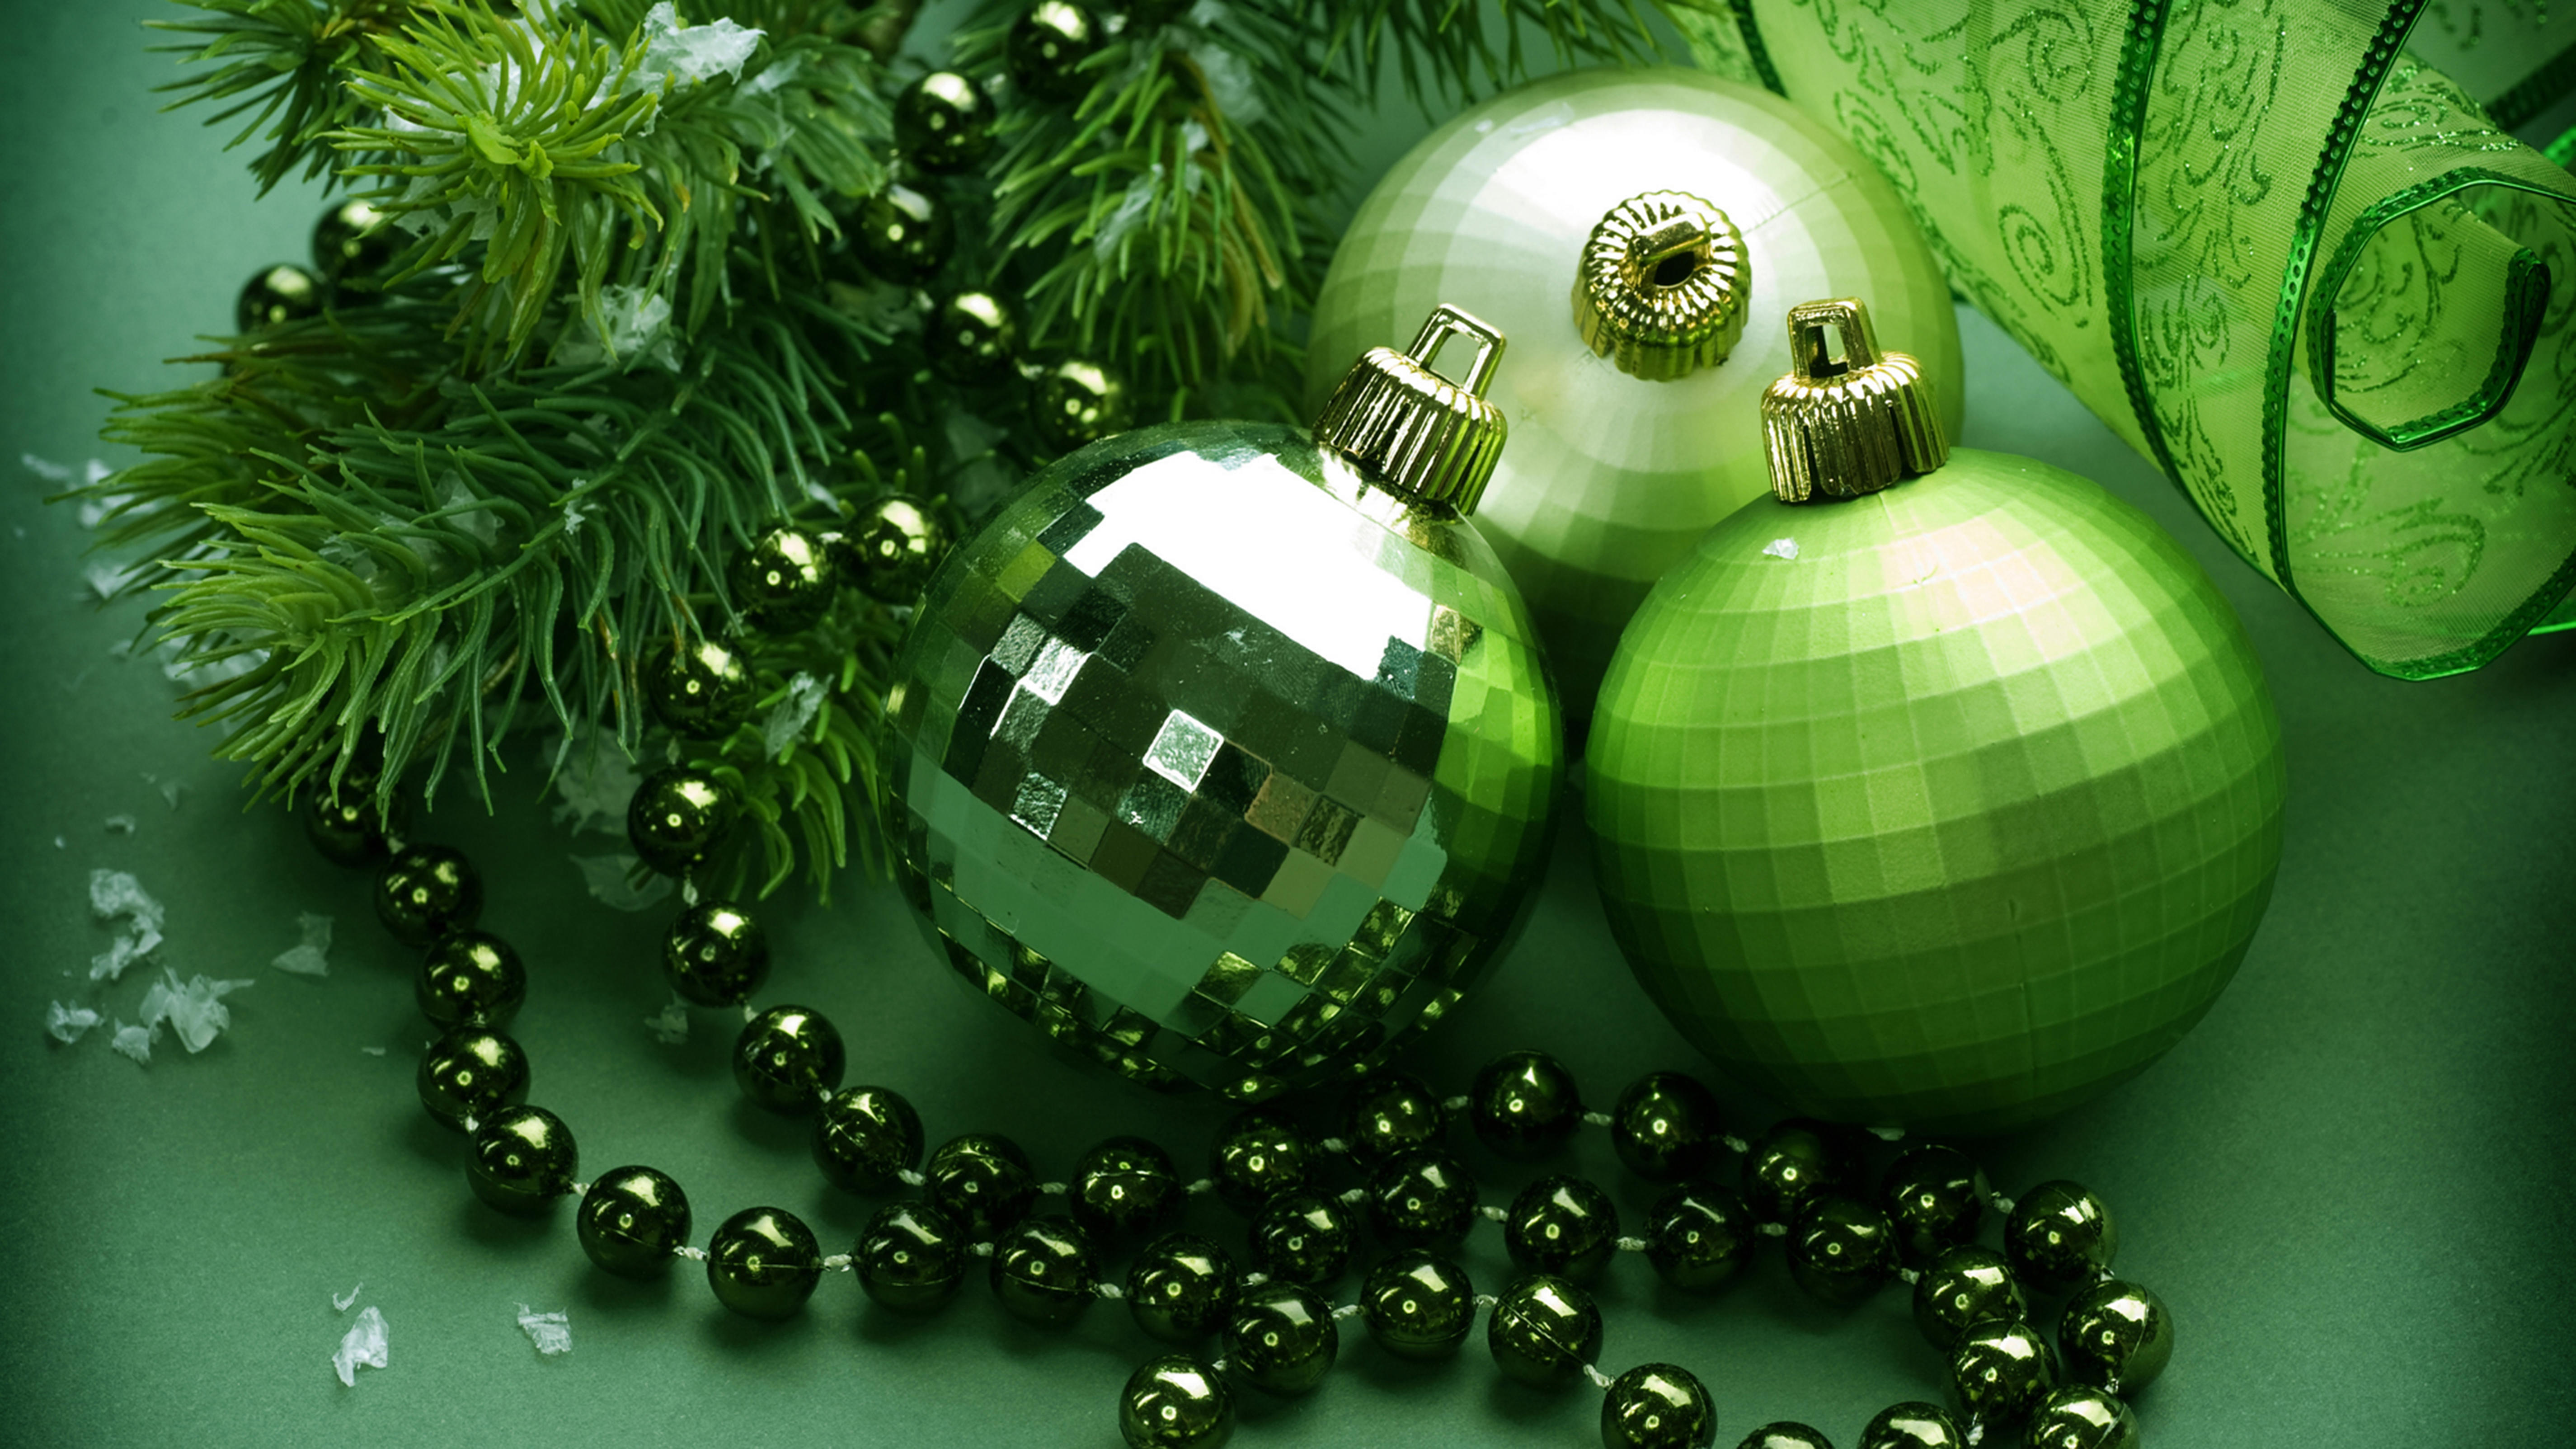 Wallpapers design christmas wallpaper new year on the desktop